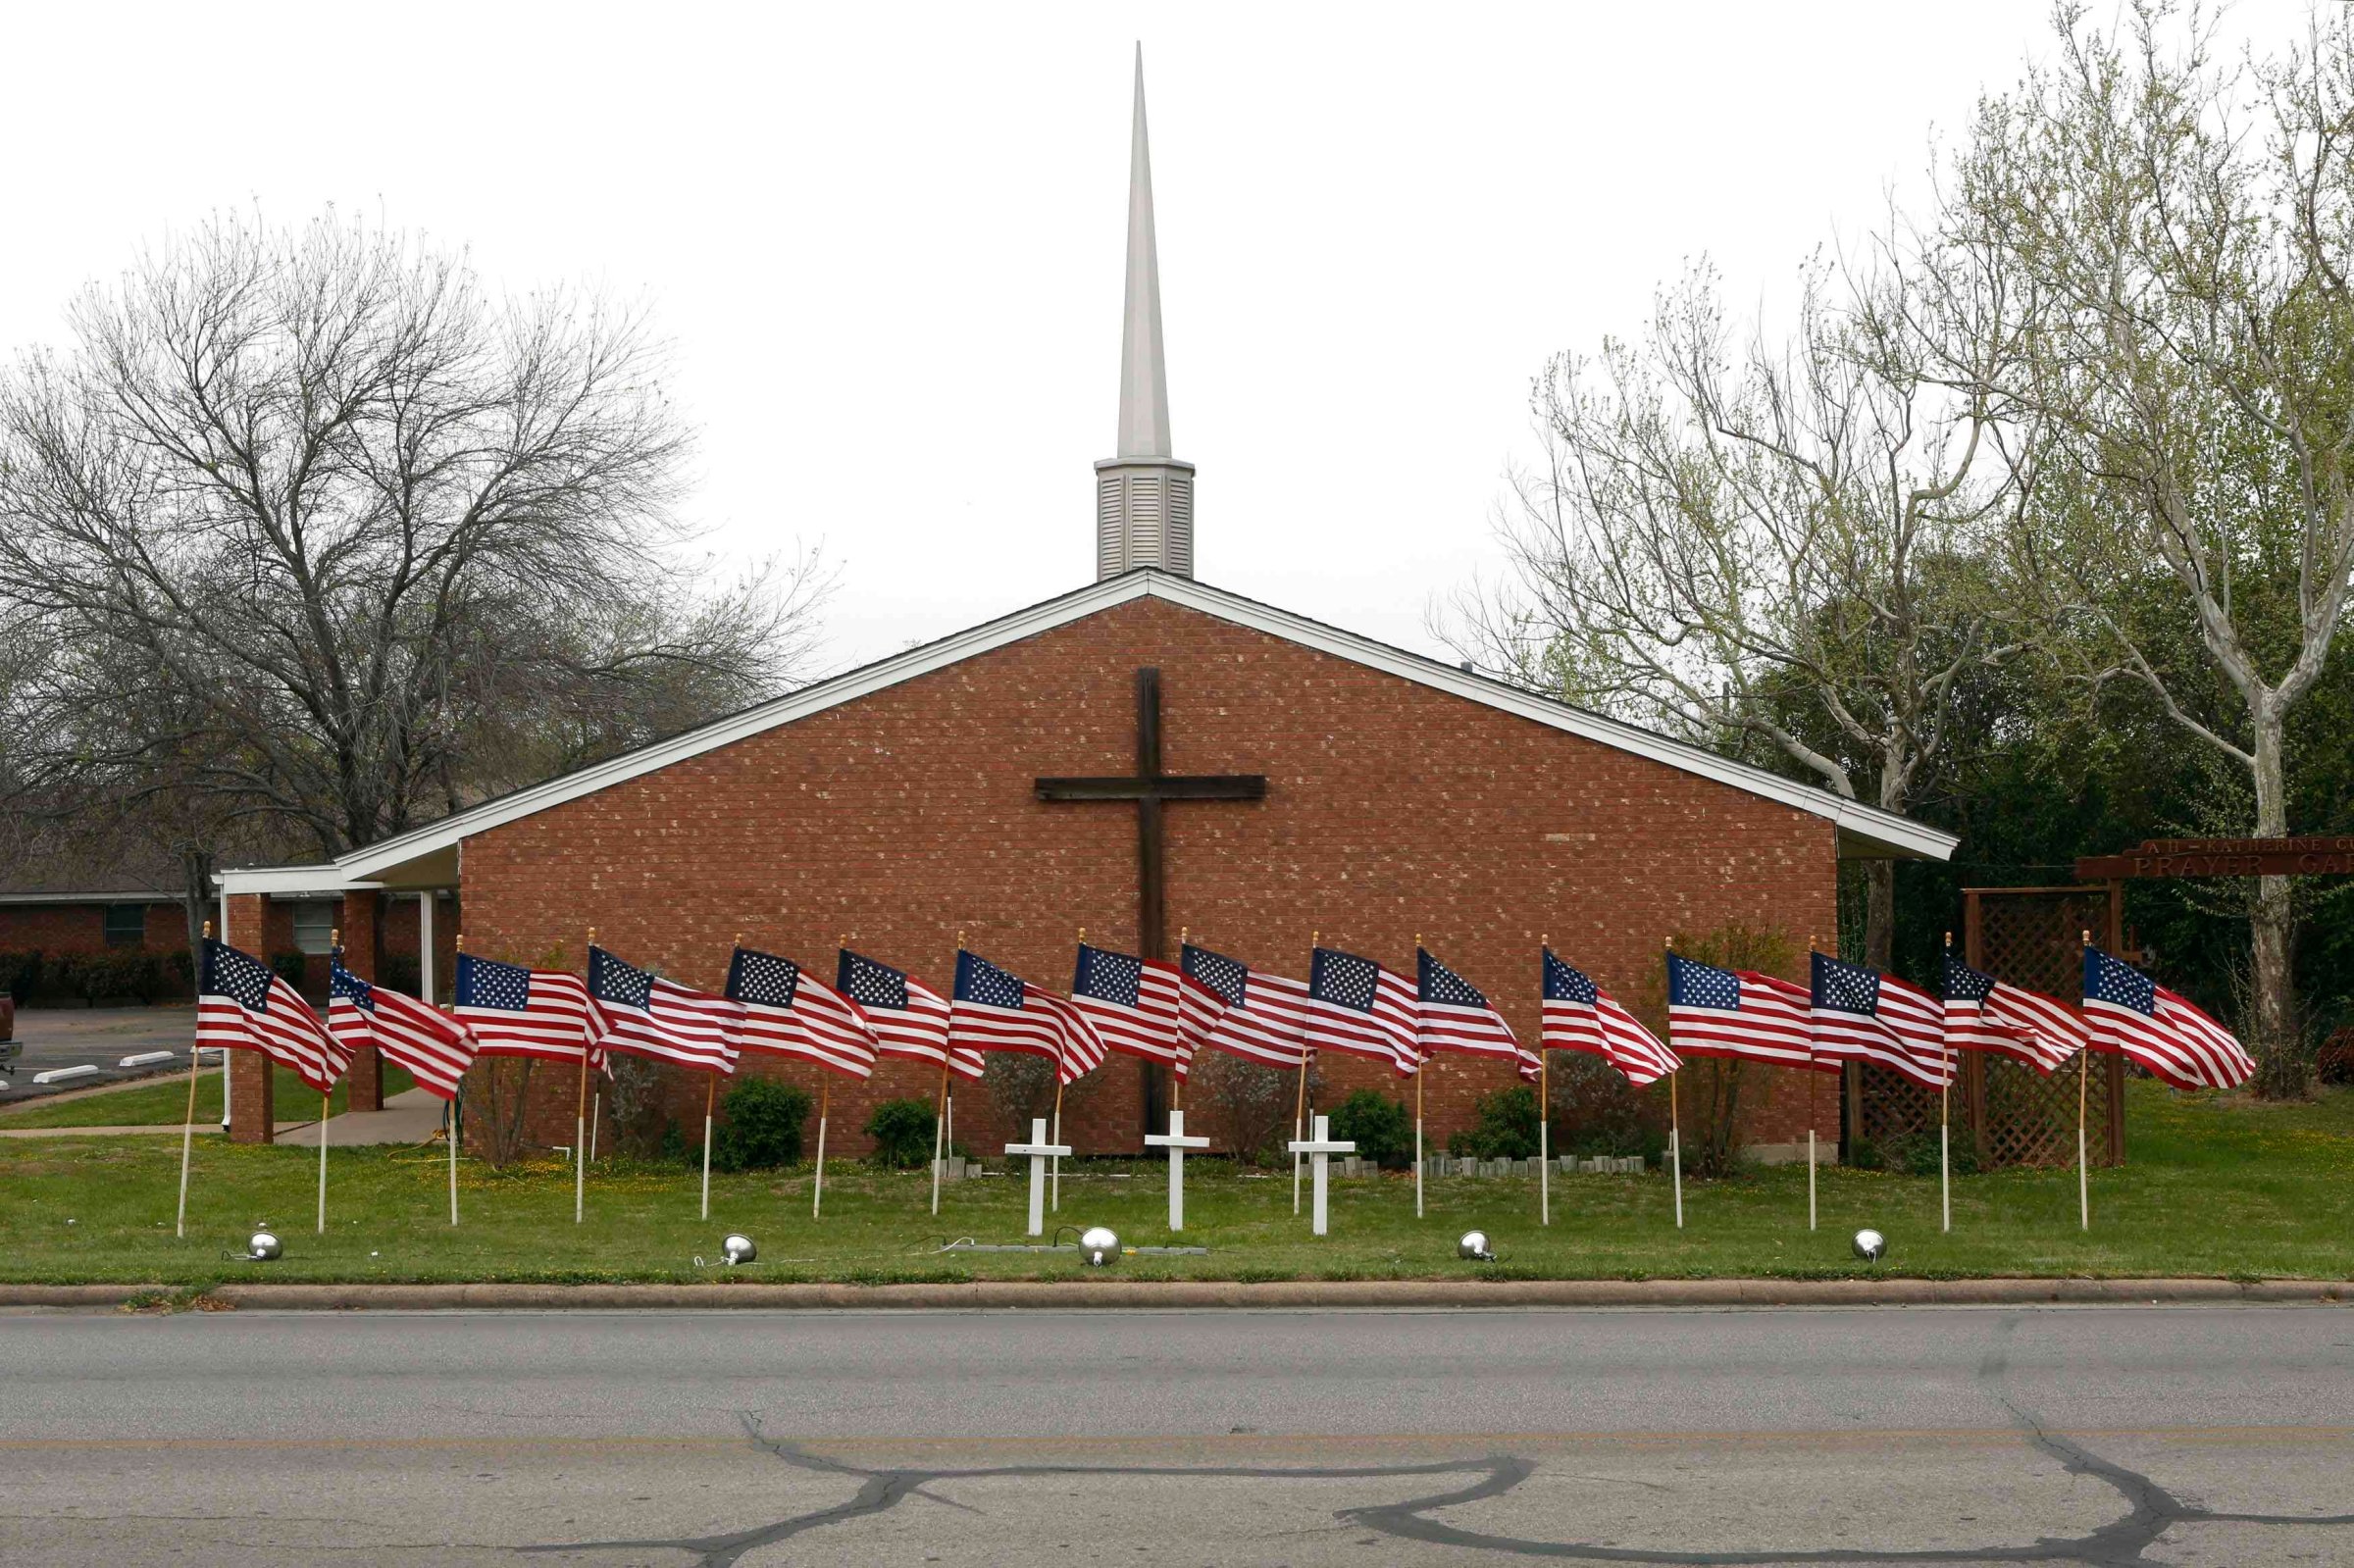 U.S. flags are pictured in front of the Central Christian Church in Killeen, Texas